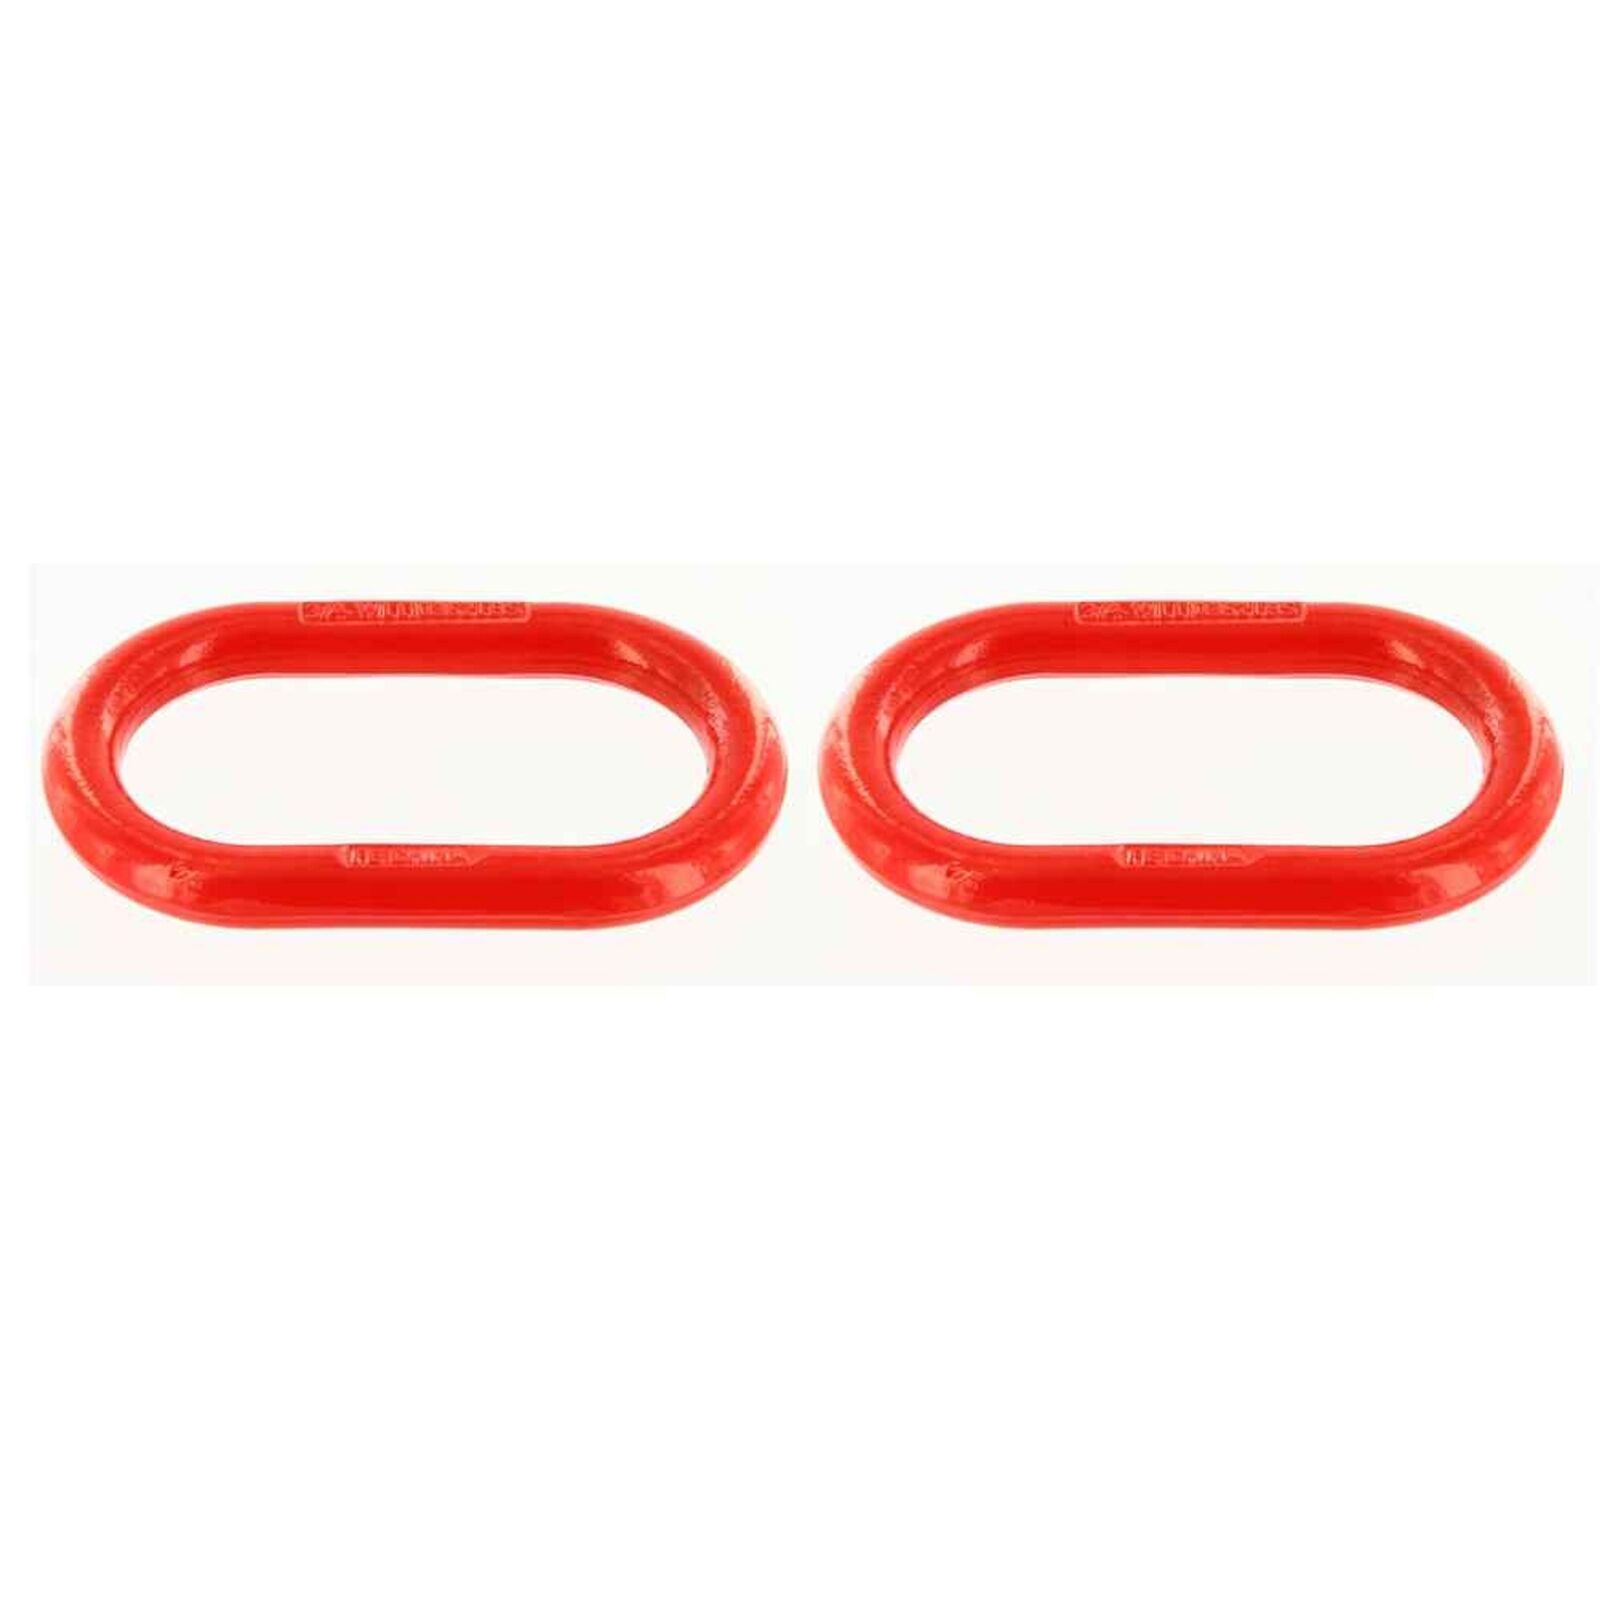 Oblong Master Link For Chain - 1" - 2 Pack